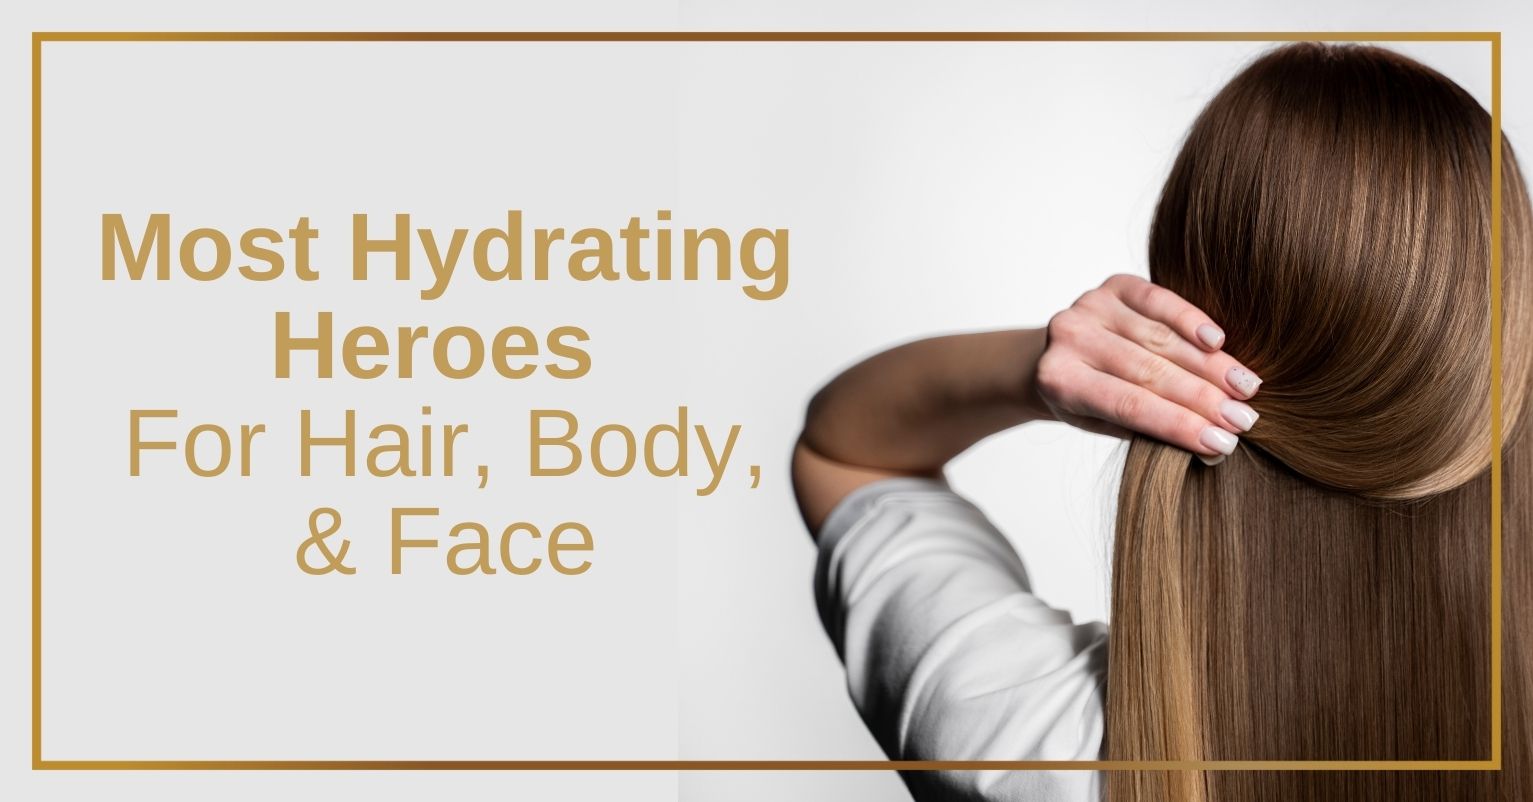 Top Hydrating Heroes for Hair Body & Face